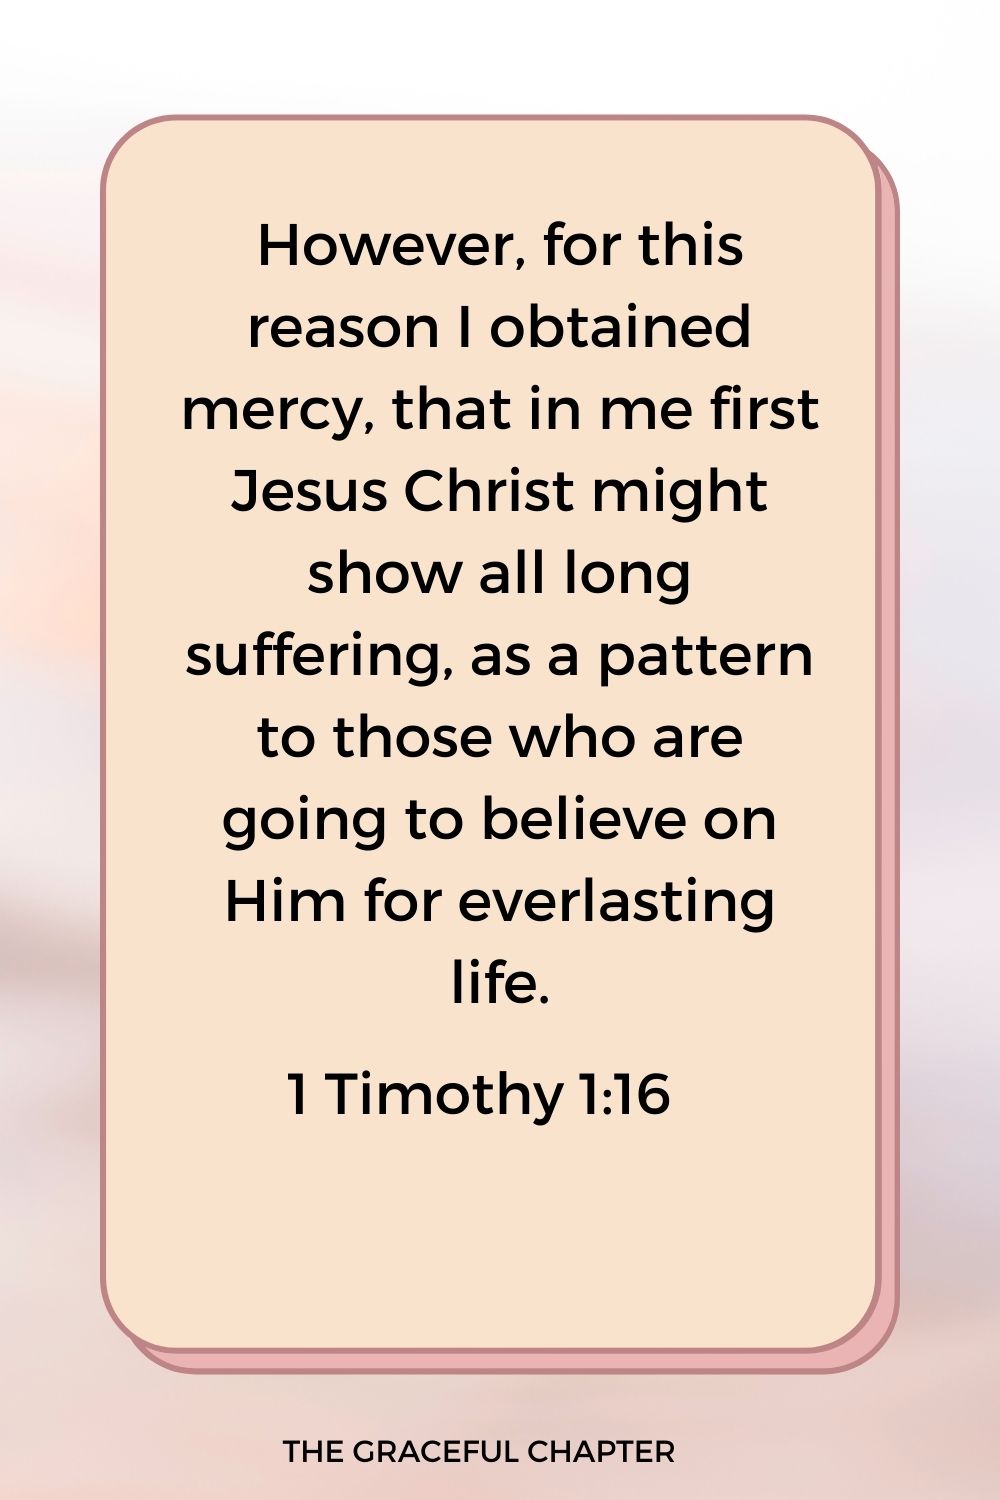 However, for this reason I obtained mercy, that in me first Jesus Christ might show all long suffering, as a pattern to those who are going to believe on Him for everlasting life. 1 Timothy 1:16